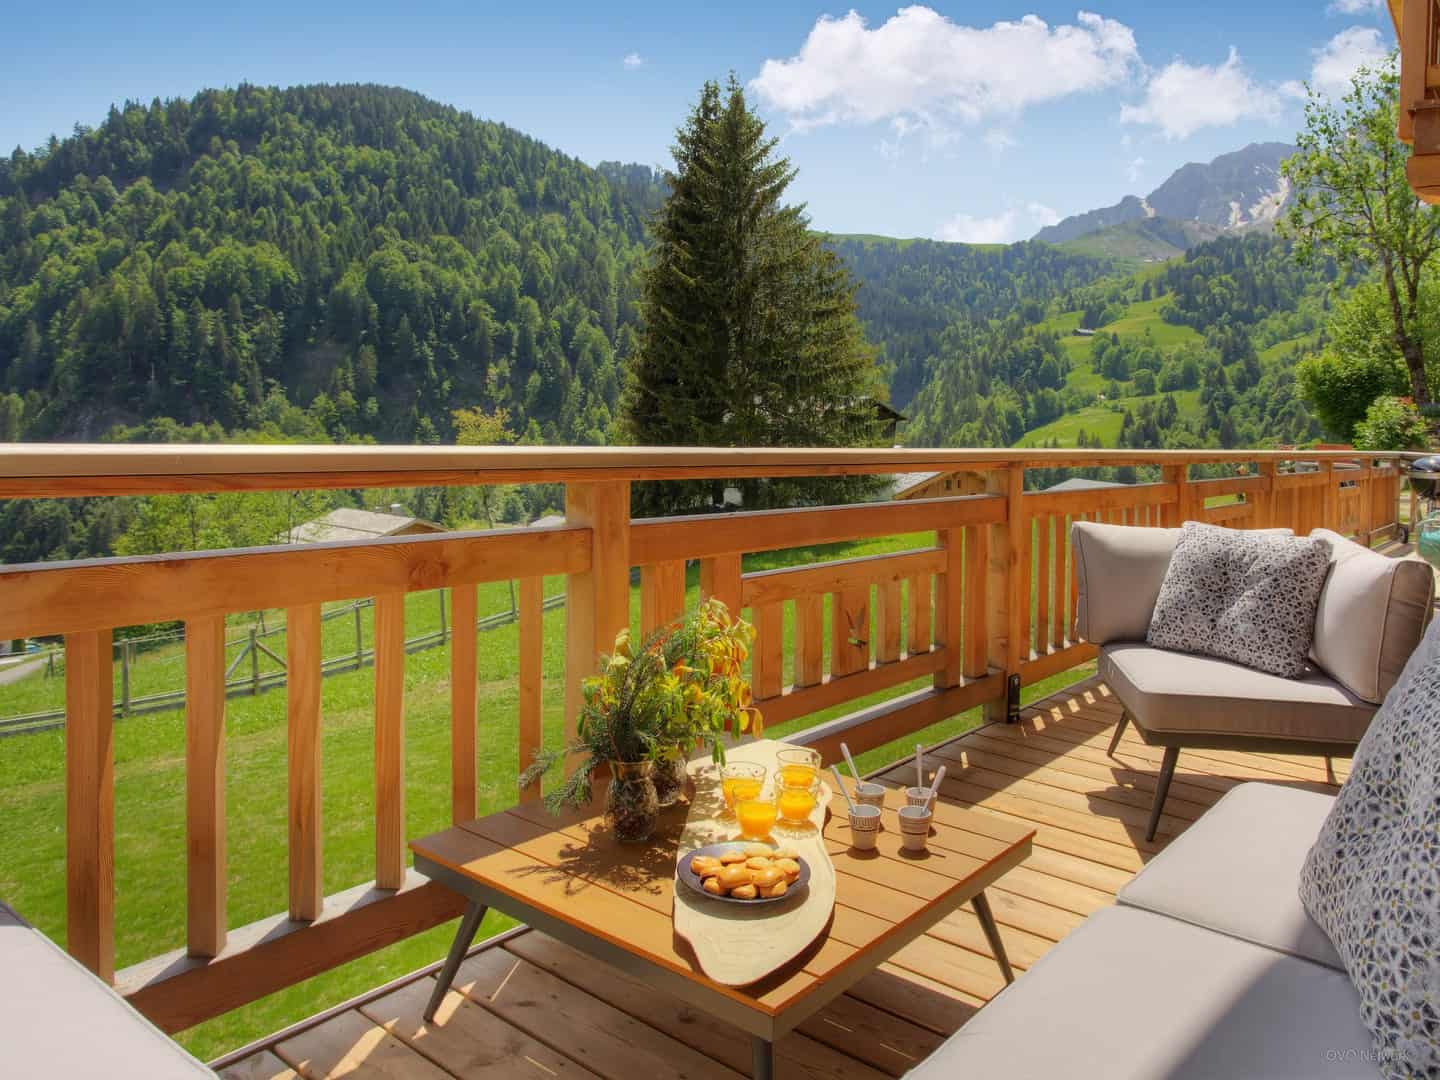 The outdoor lounge area at Chalet Sabaroc.